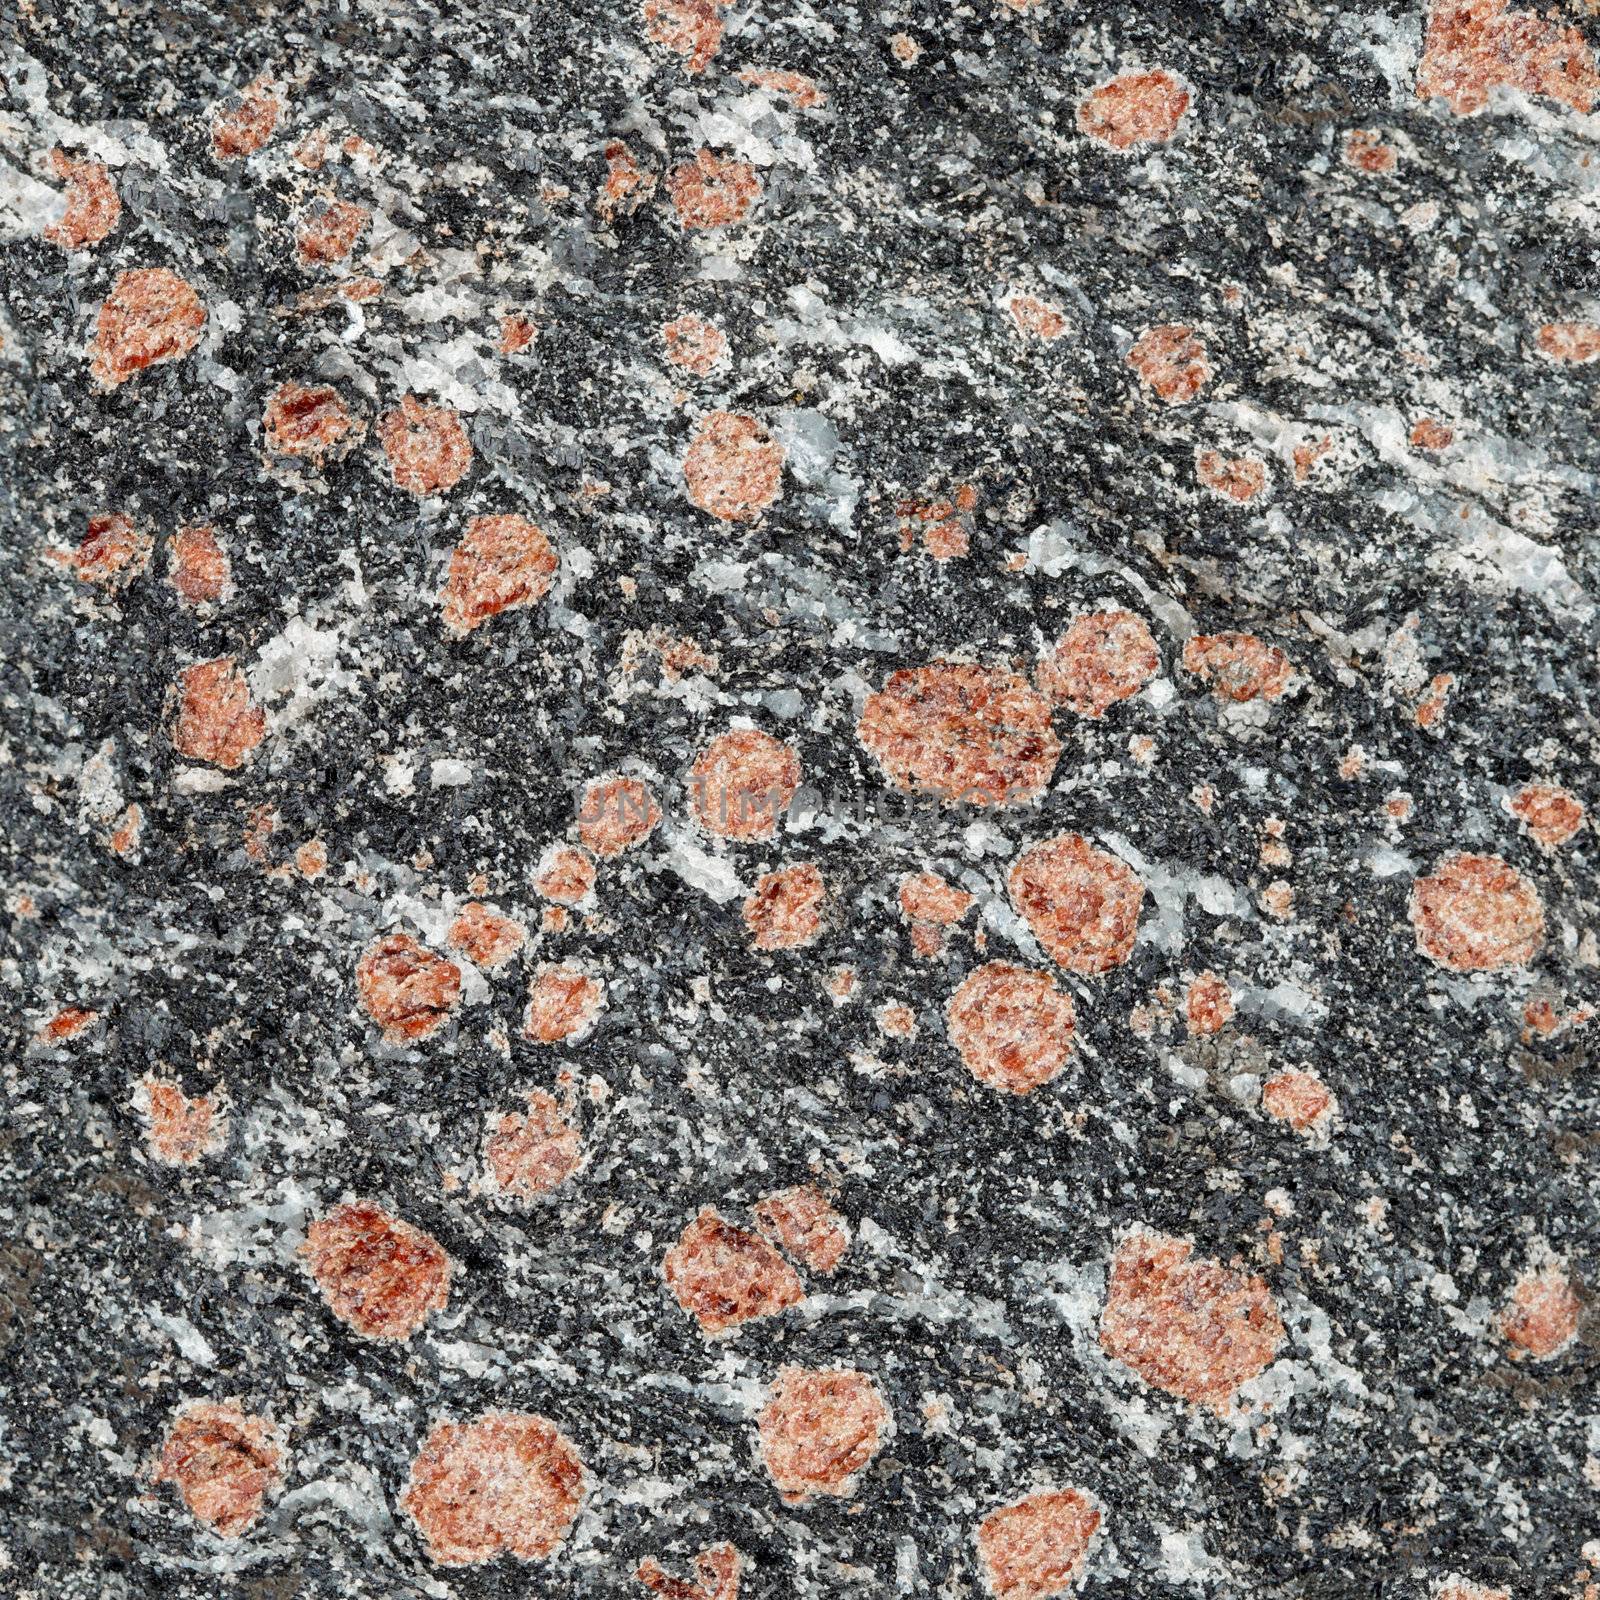 Seamless texture - dark stone surface with red minerals